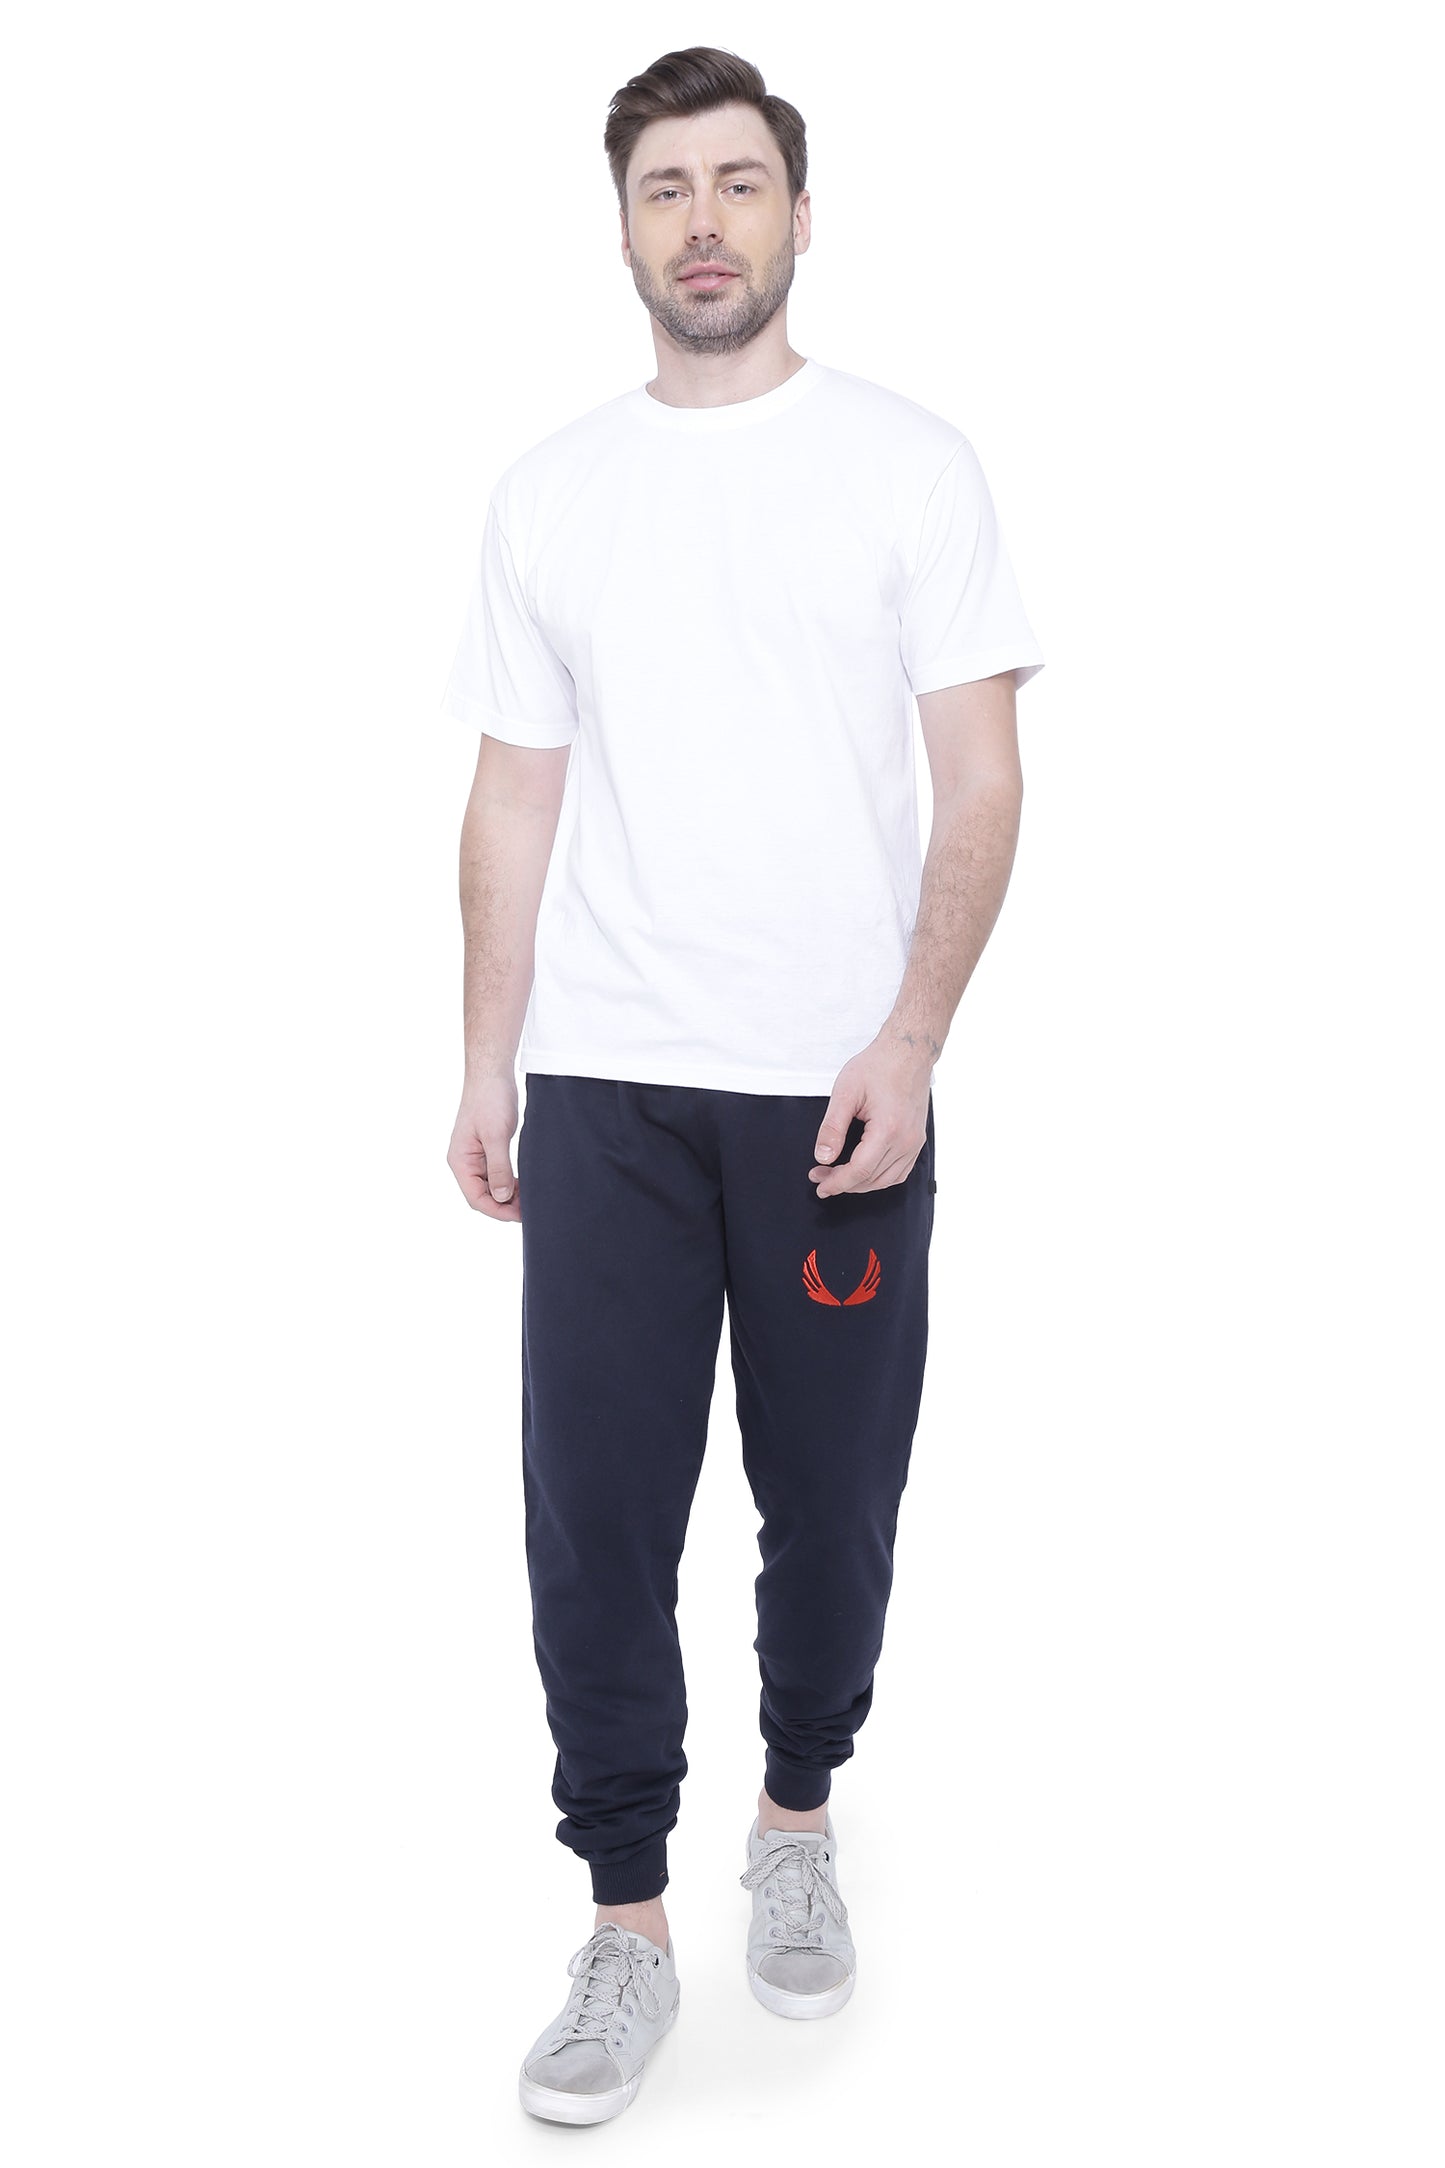 Neo Garments Men's Cotton Sweatpants - Navy Blue | SIZES FROM M TO 7XL.